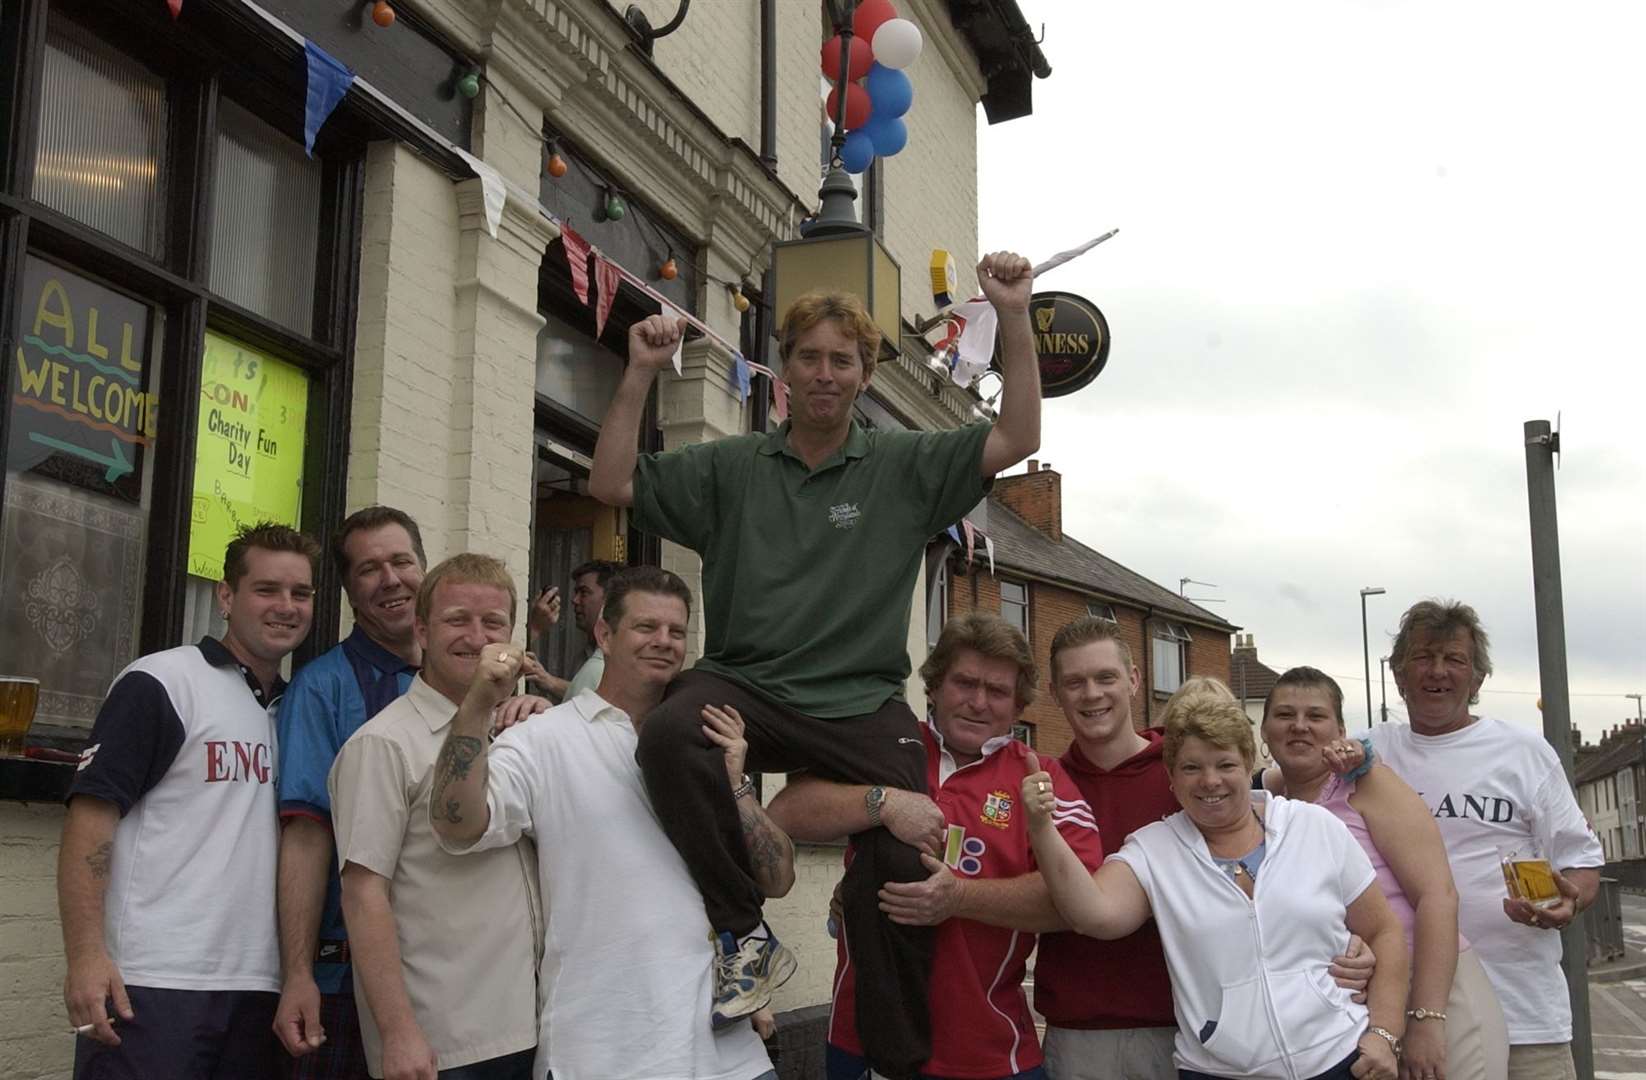 Outside the Brickmakers Arms in Luton Road, Chatham, in June 2002. Held aloft is Brian Crawley who walked from Orpington to raise money. The pub is still going today